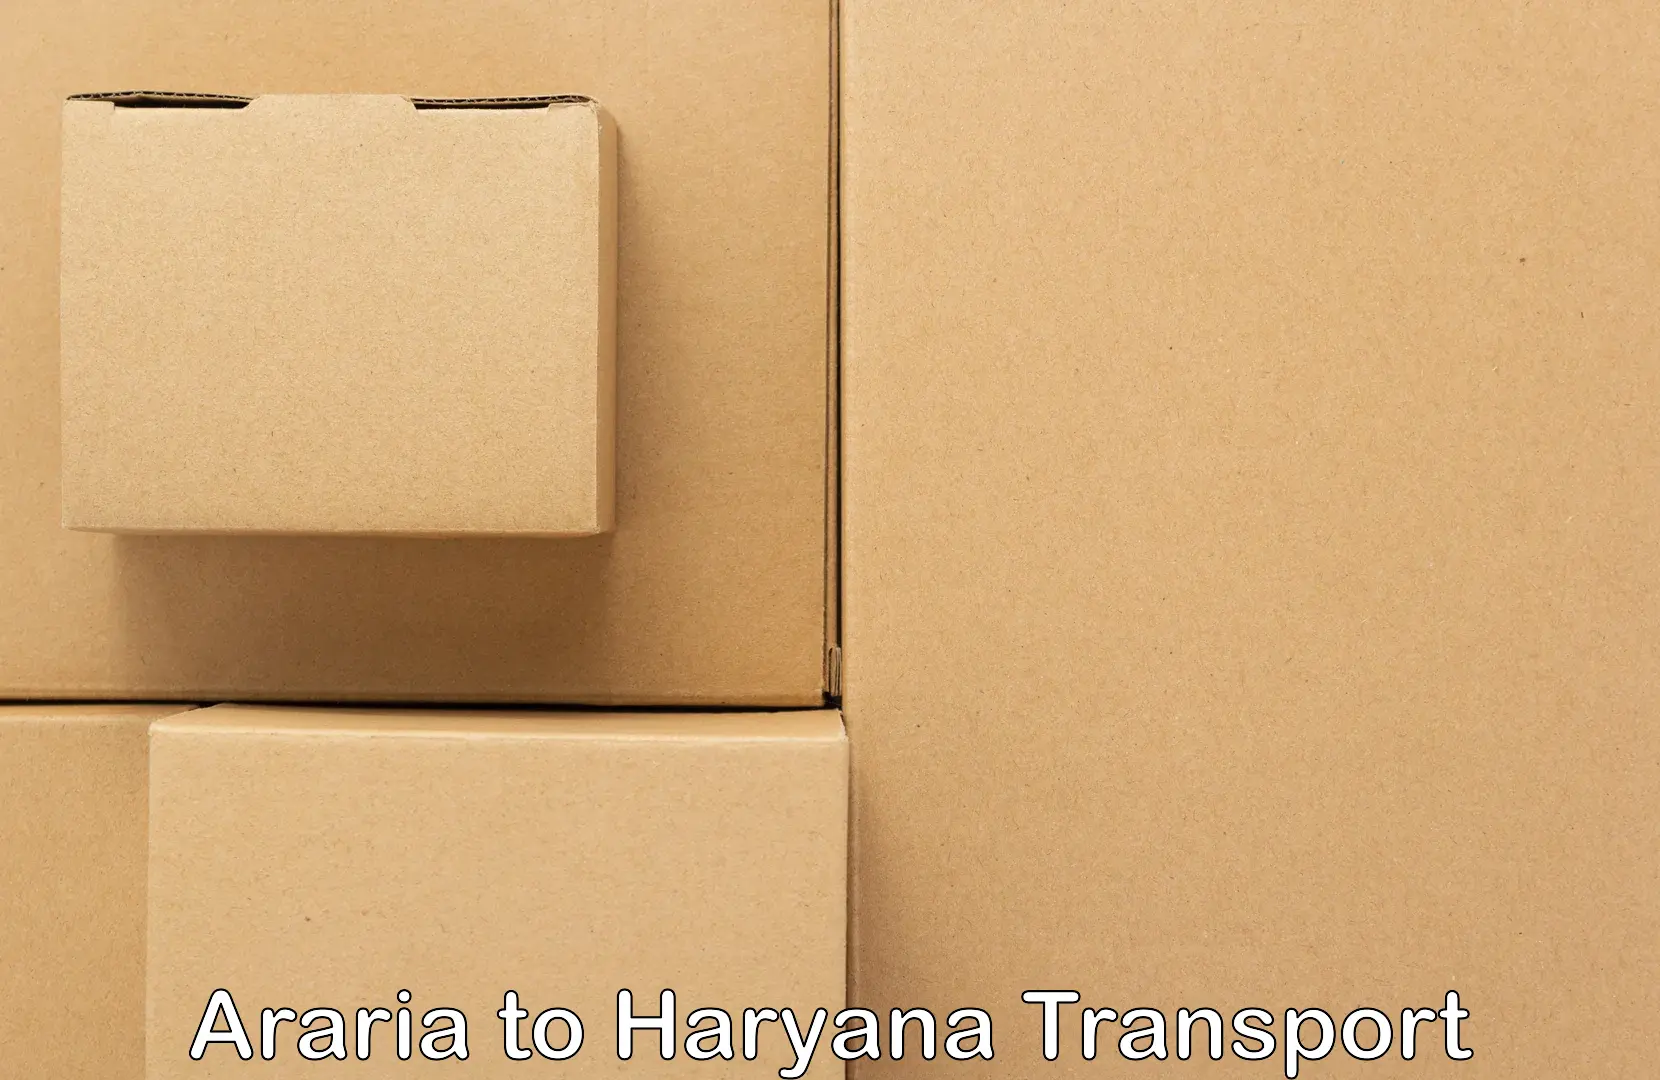 Daily parcel service transport Araria to Hansi